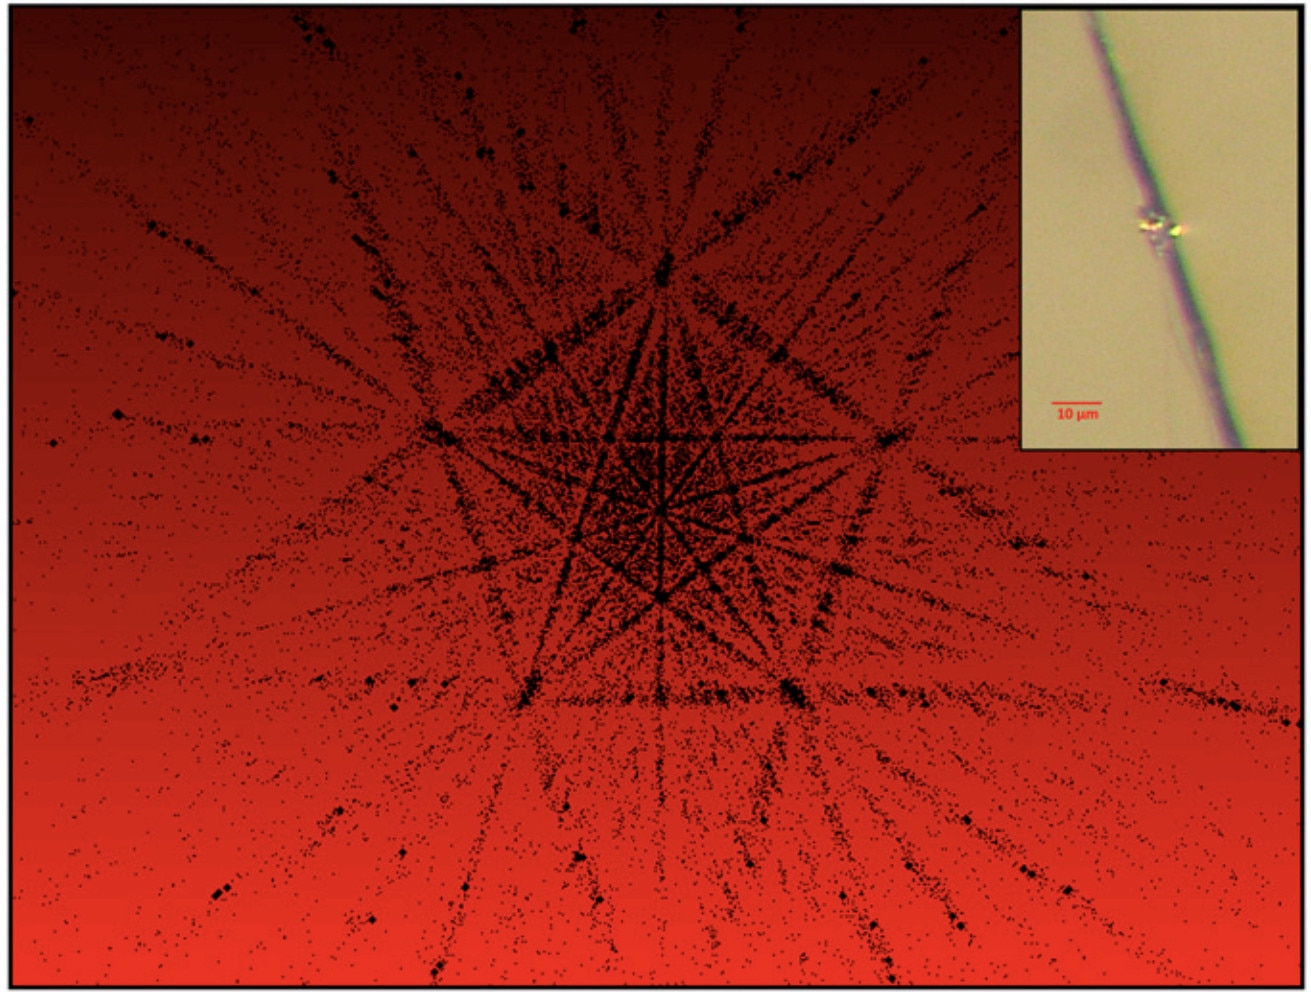 When examining the manufactured quasicrystal using a technique called X-Ray Diffraction, the fivefold symmetry becomes apparent. Inset: The fragment examined is attached to a thin length of carbon fiber. Credit: Asimow et al.